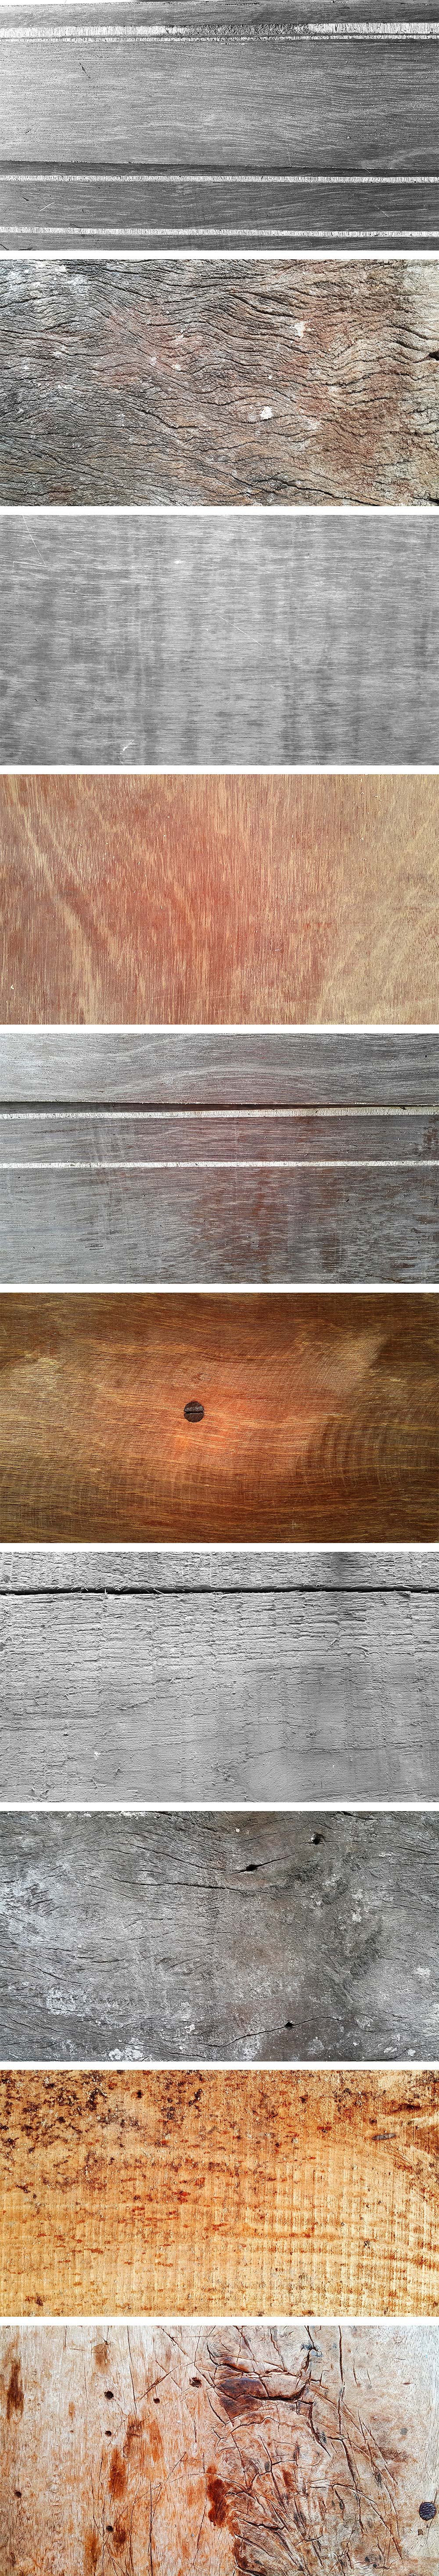 Withered Wood Textures